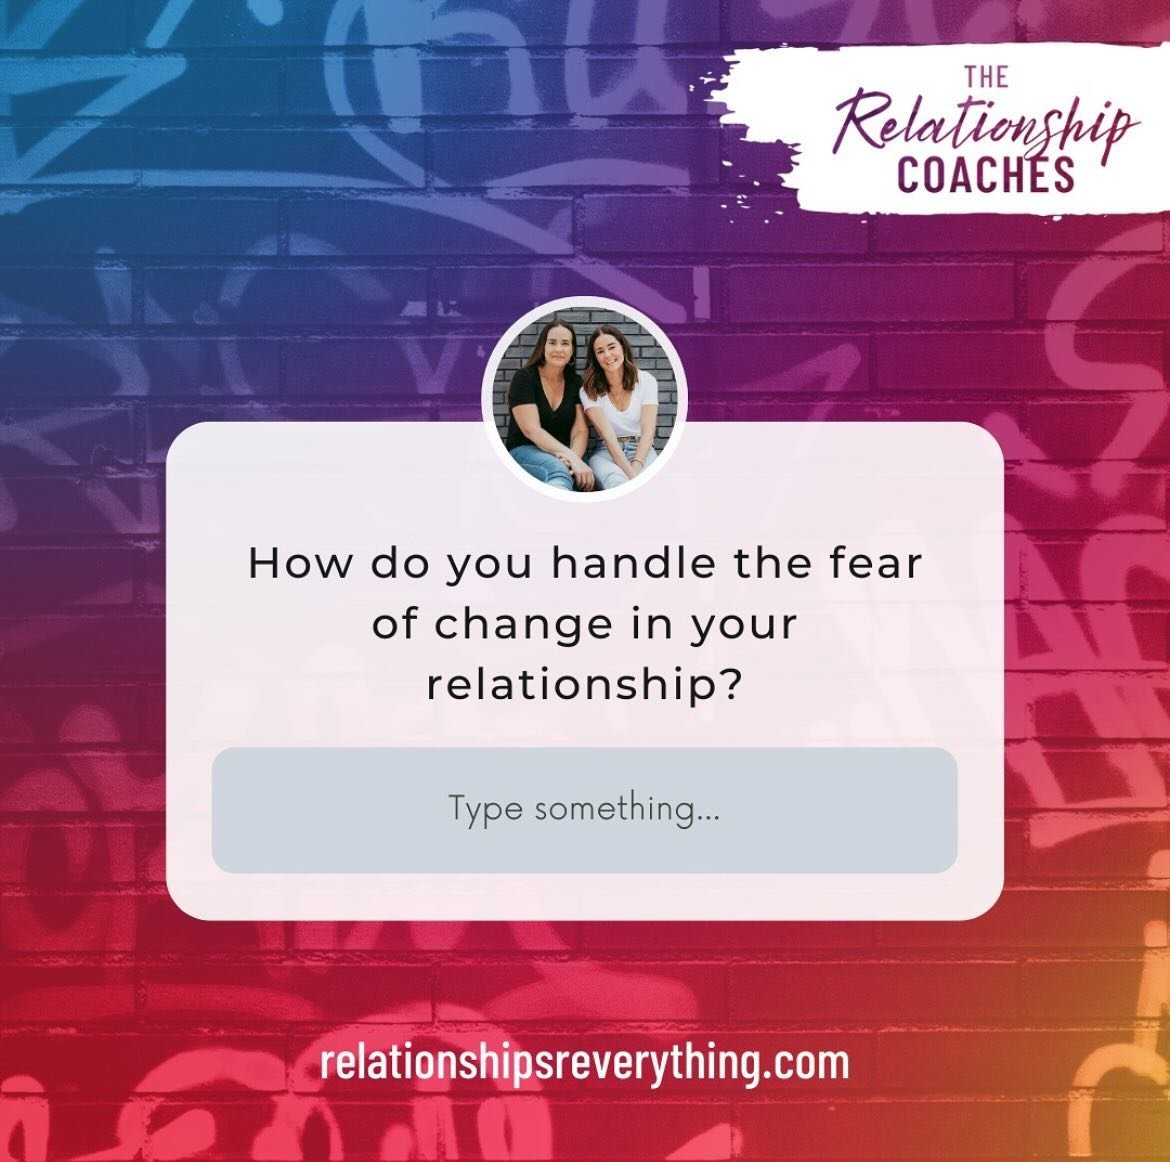 We all know that relationships can be tough. But if there&rsquo;s one thing we&rsquo;ve learned, it&rsquo;s that change is inevitable. 💯

Instead of running away from the scary stuff, face it head-on!

Tough conversations are never easy, but they&rs